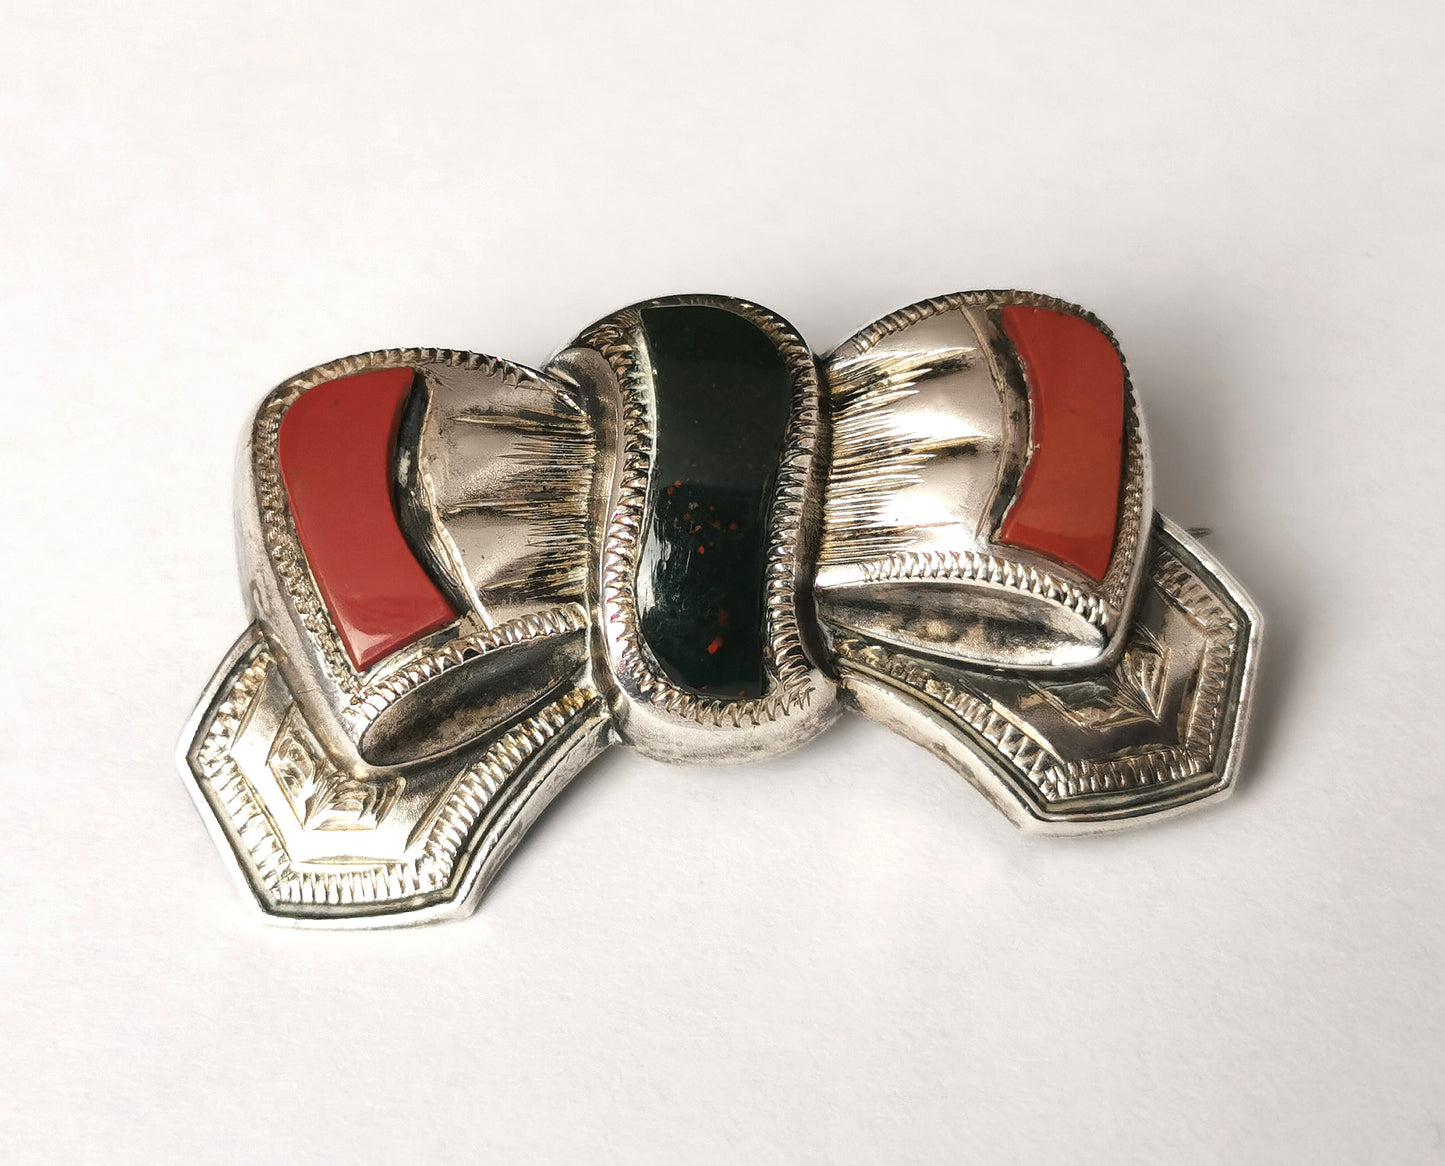 Antique Victorian Agate and Silver bow brooch